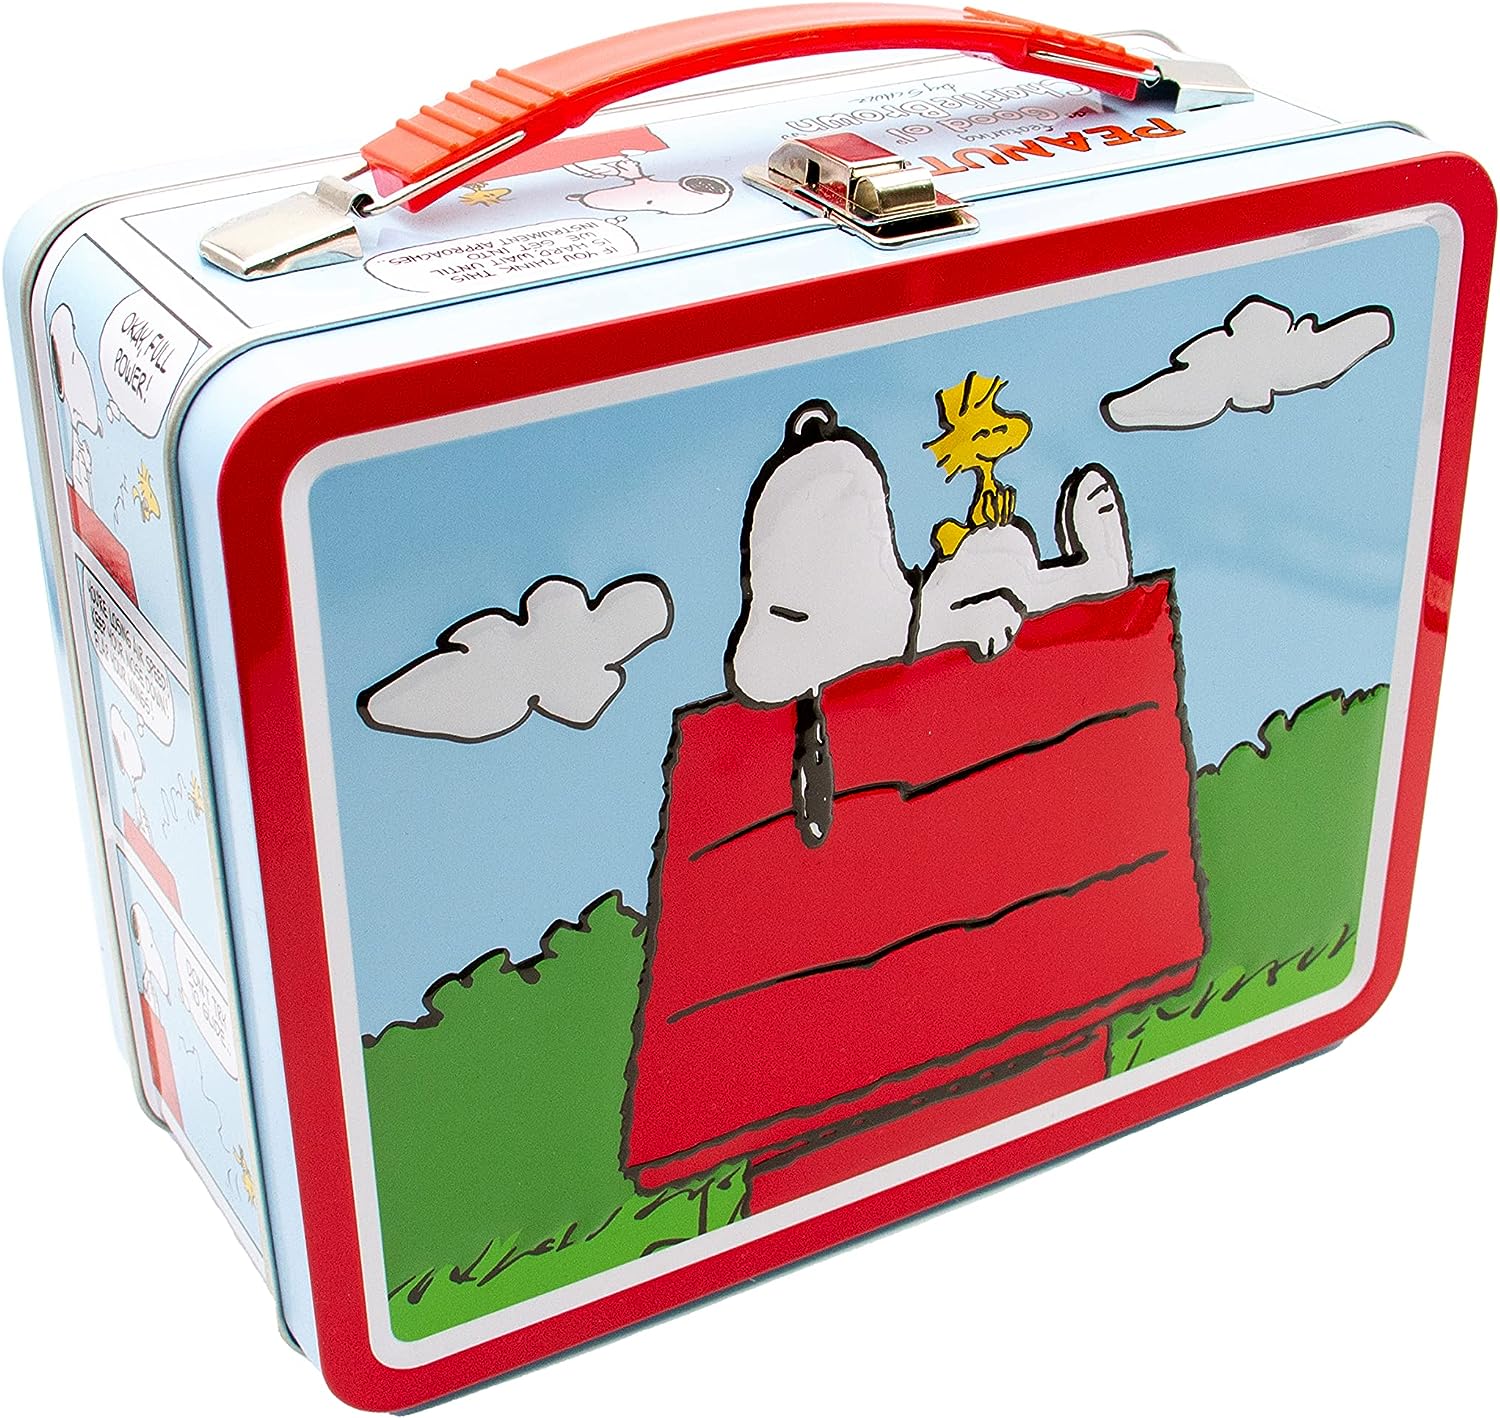 Peanuts Snoopy - Lunch Box